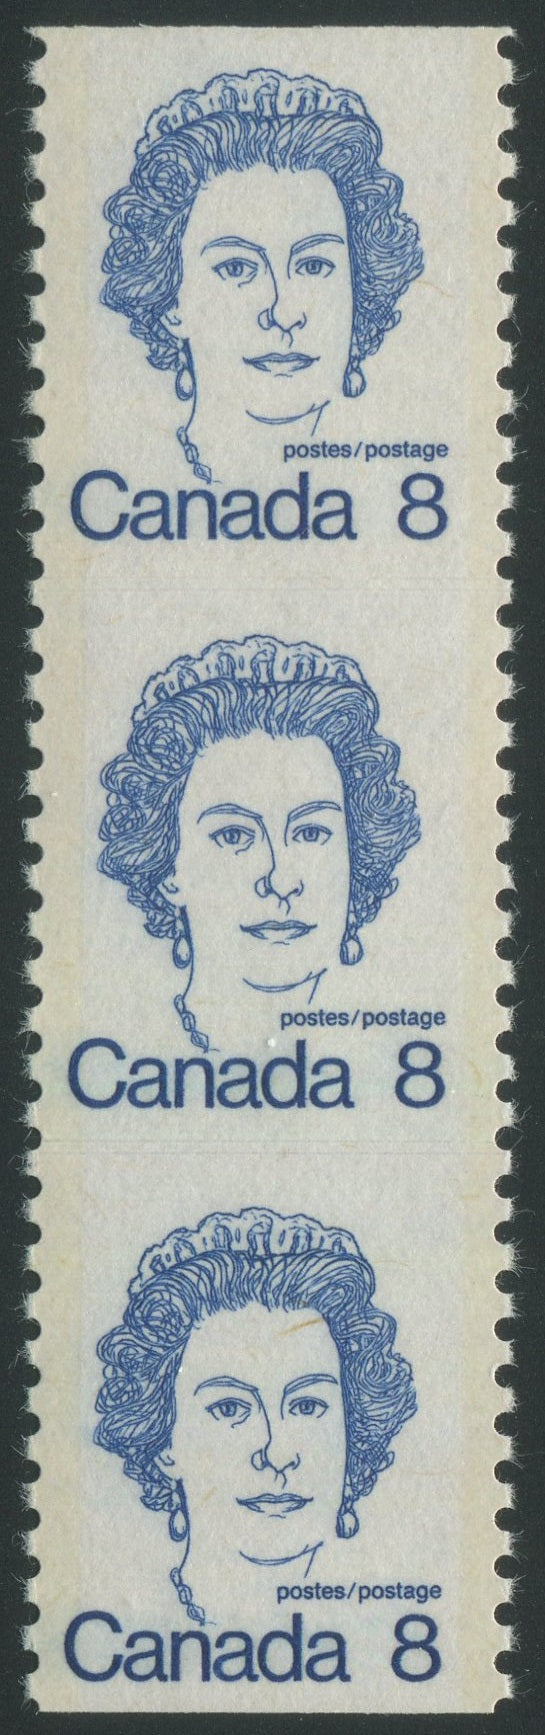 0604CA2404 - Canada #604 - Mint Strip of 3, Double Rouletted, UNLISTED